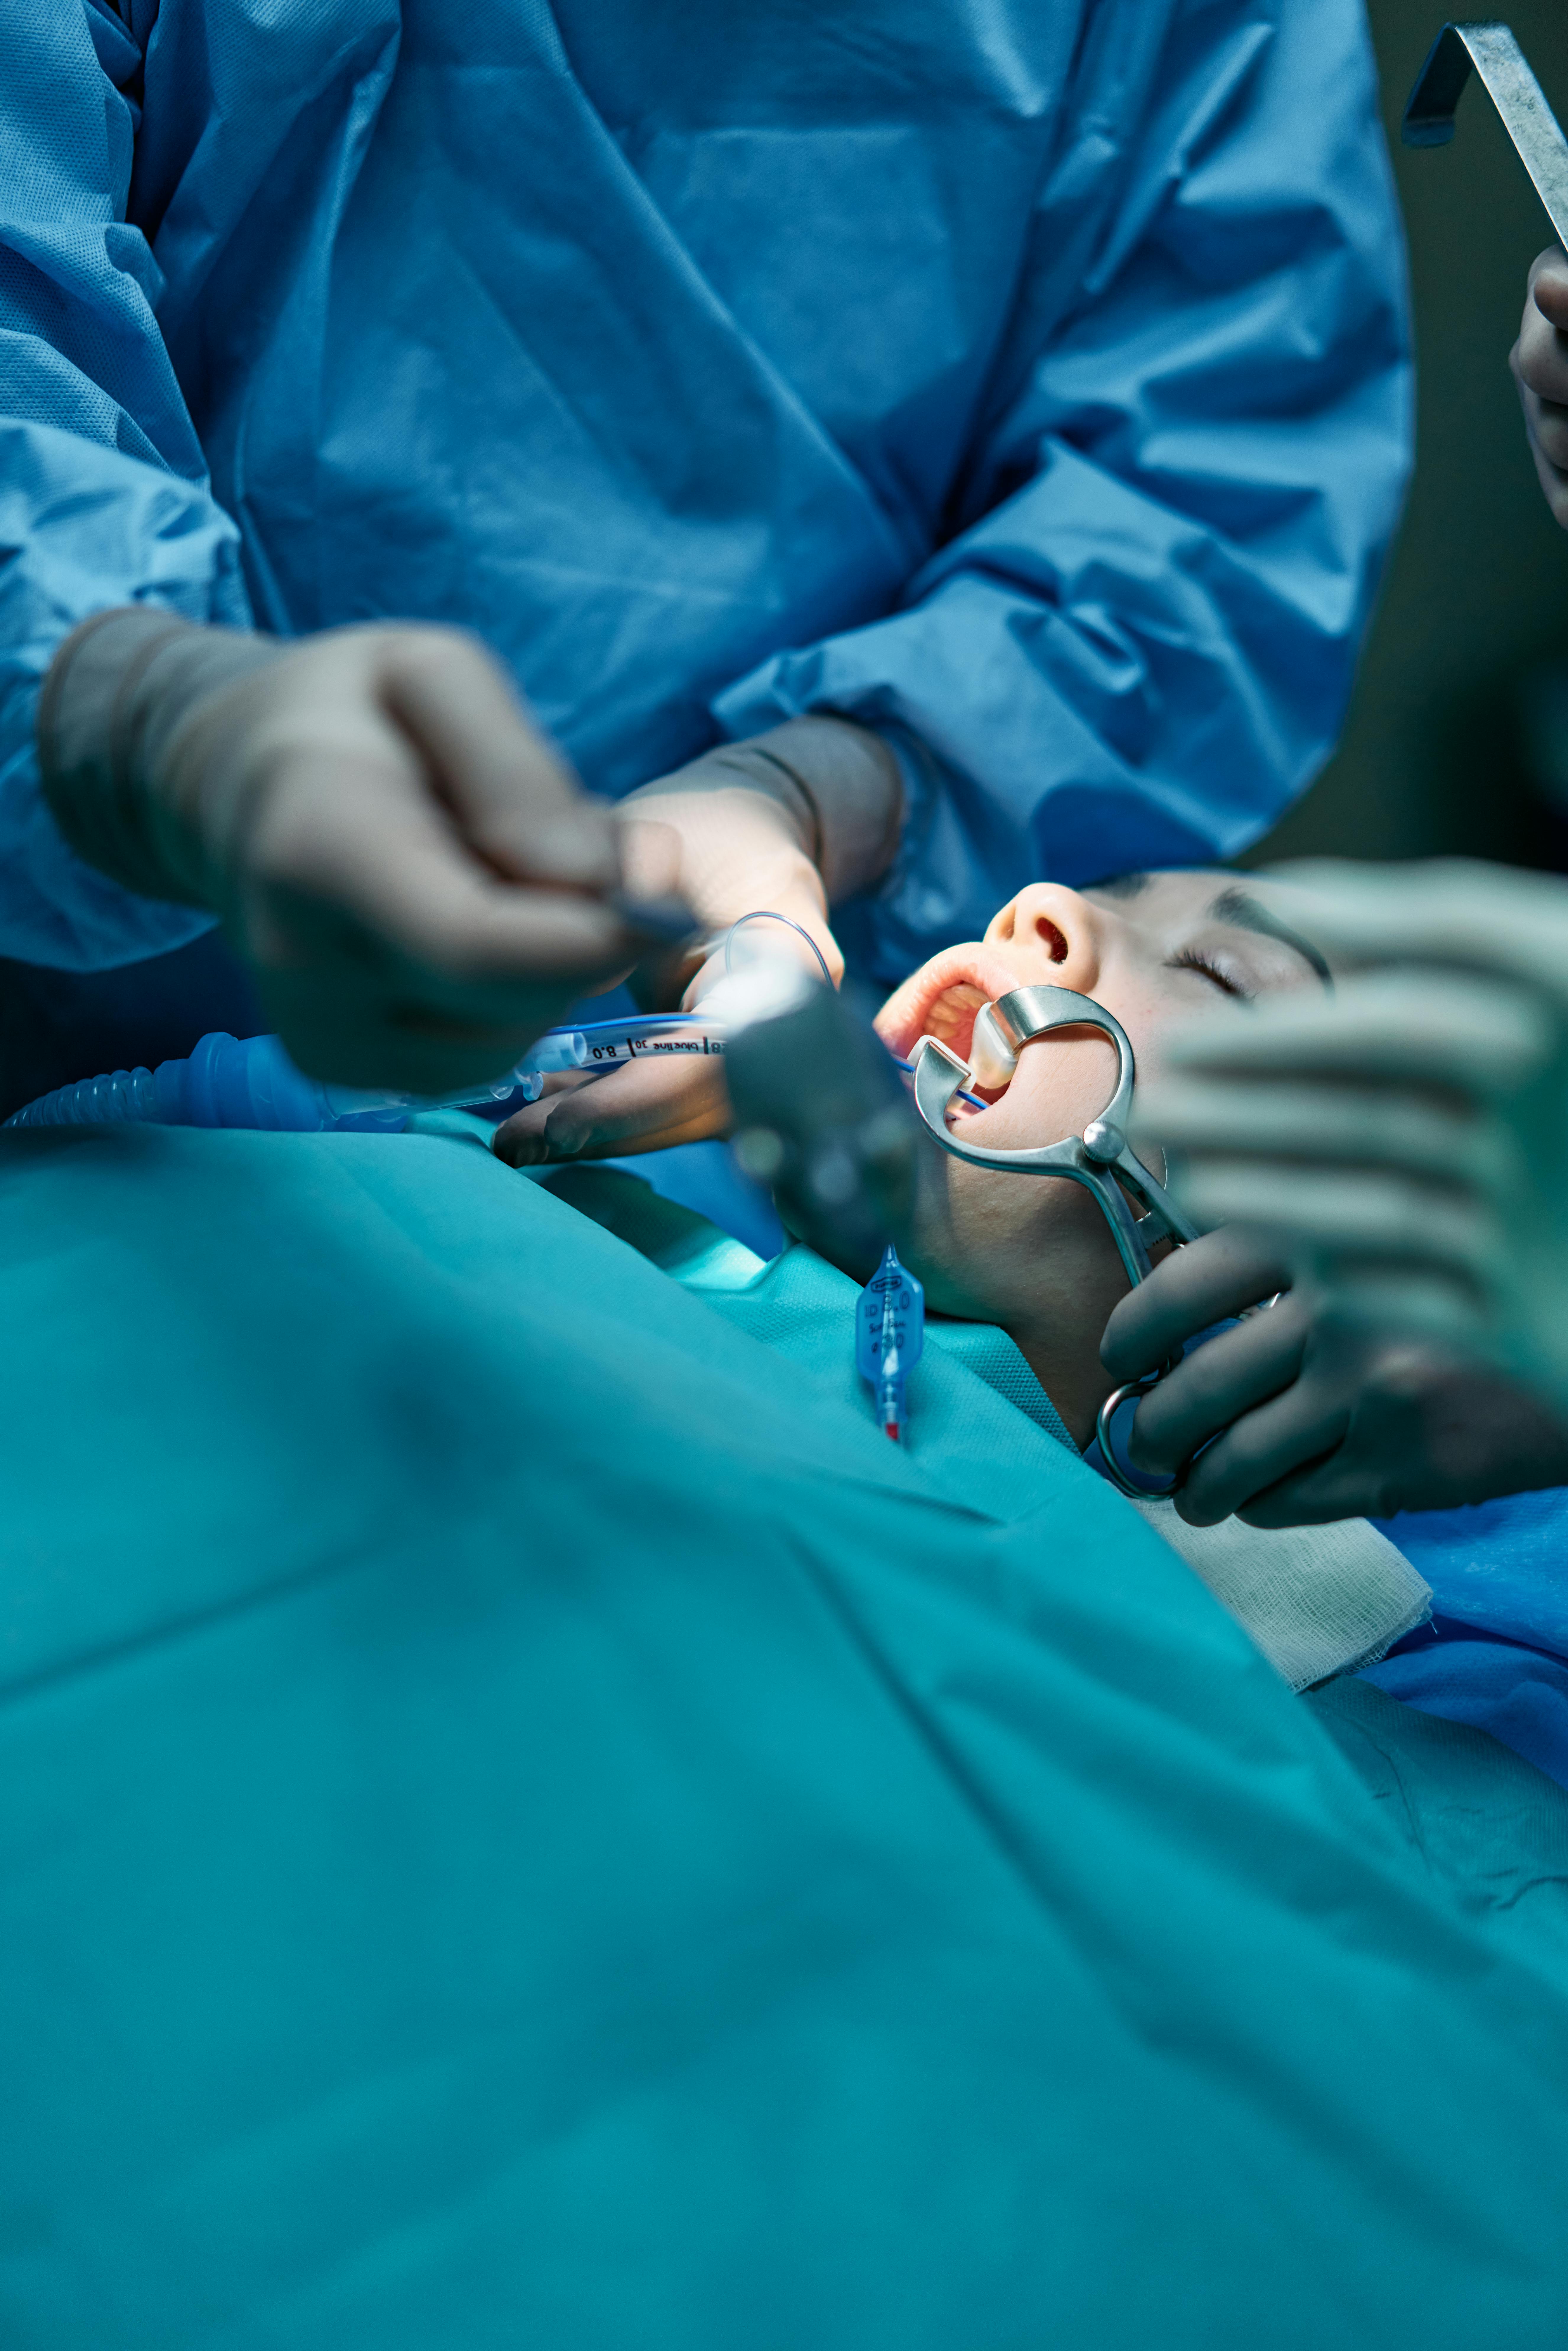 image of a private dentist, london, performing oral surgery on a patient